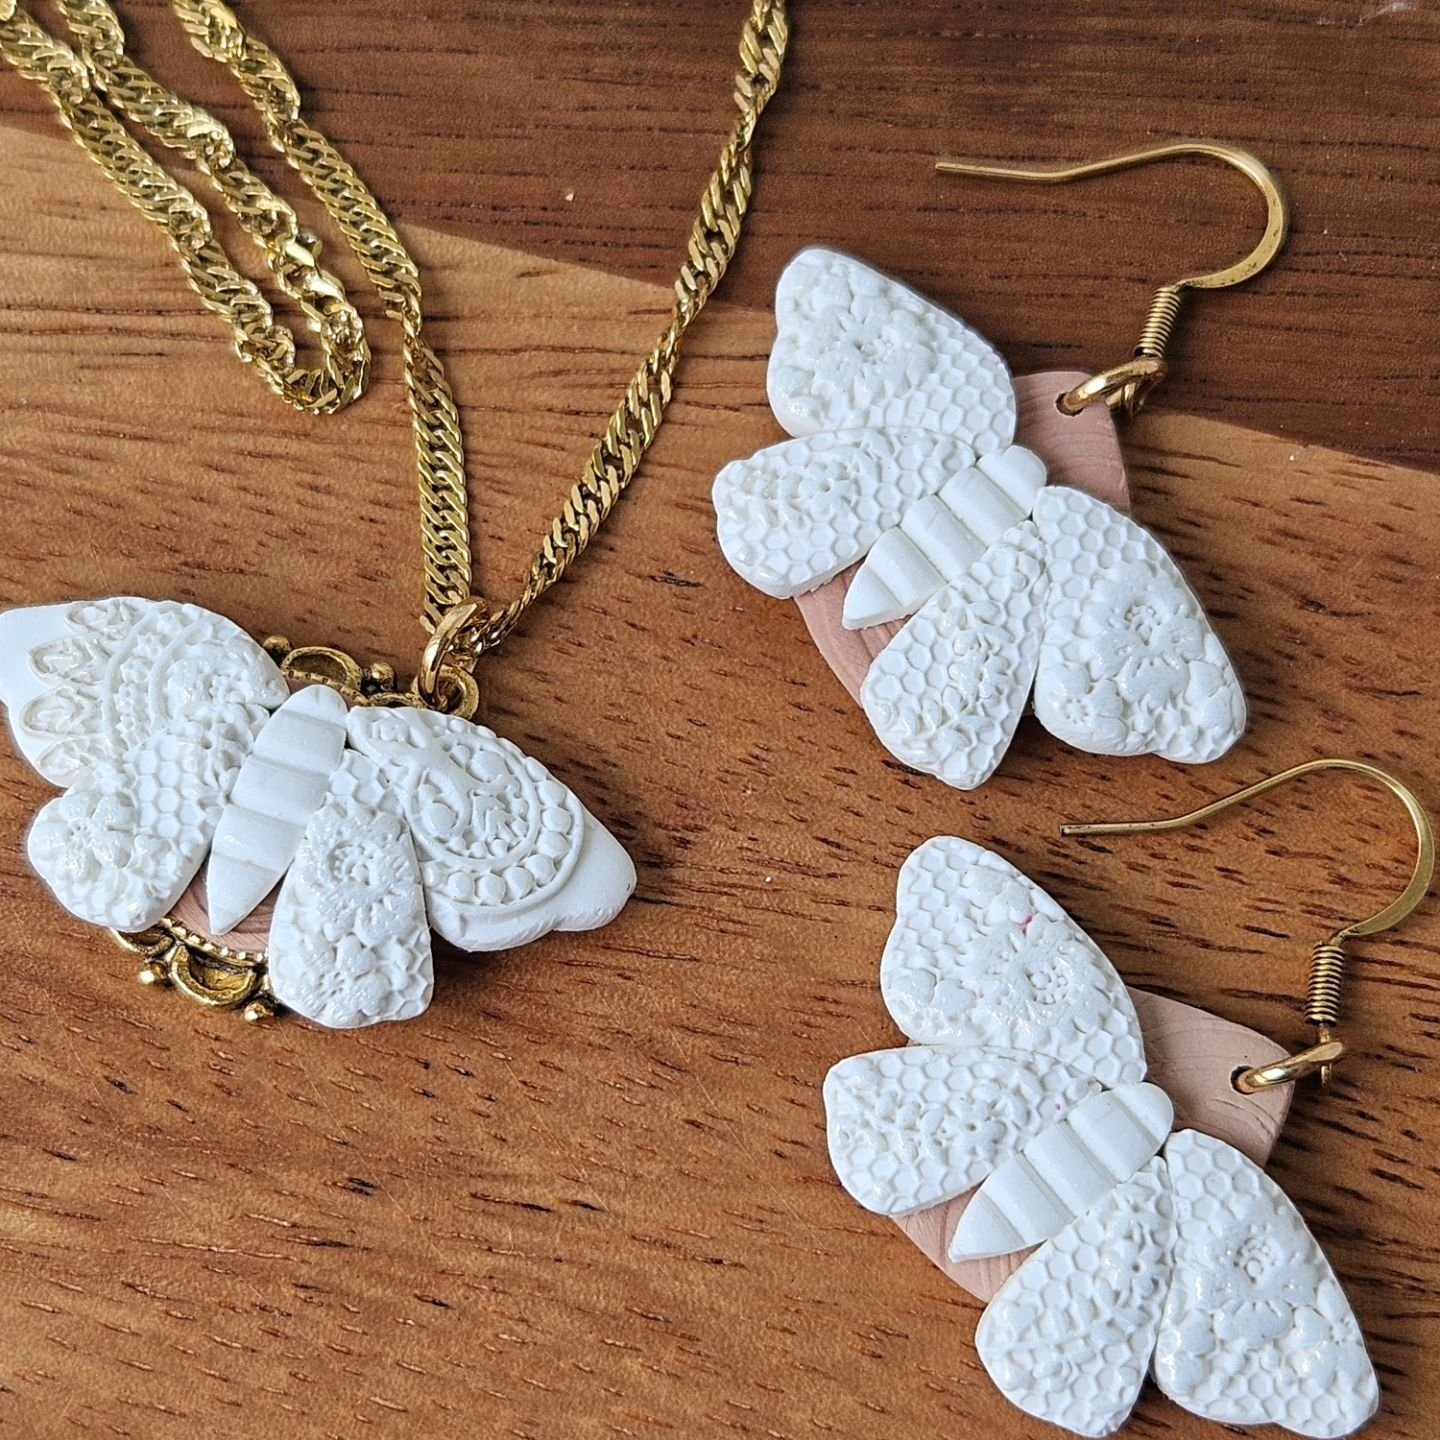 I have had moths on my &quot;to make&quot; list for a while now. Honestly, so many of the items from the latest Etsy update were ideas I have had for a year now. It feels good to finally get them made!

I love this moth set! Ivory with a lace texture